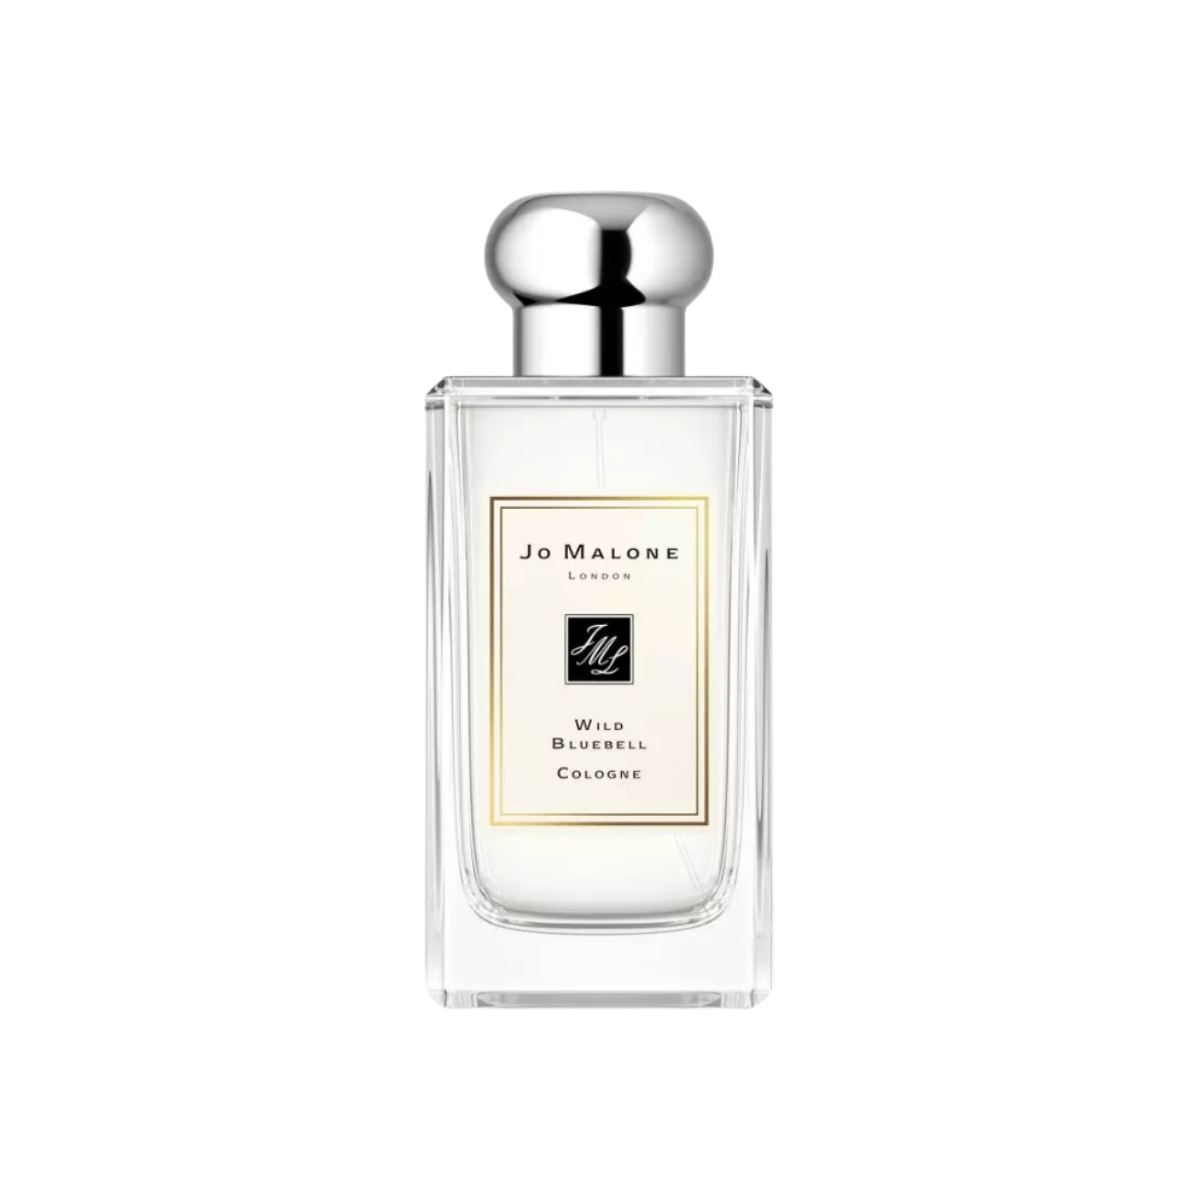 Jo Malone Wild Bluebell Cologne 100ml